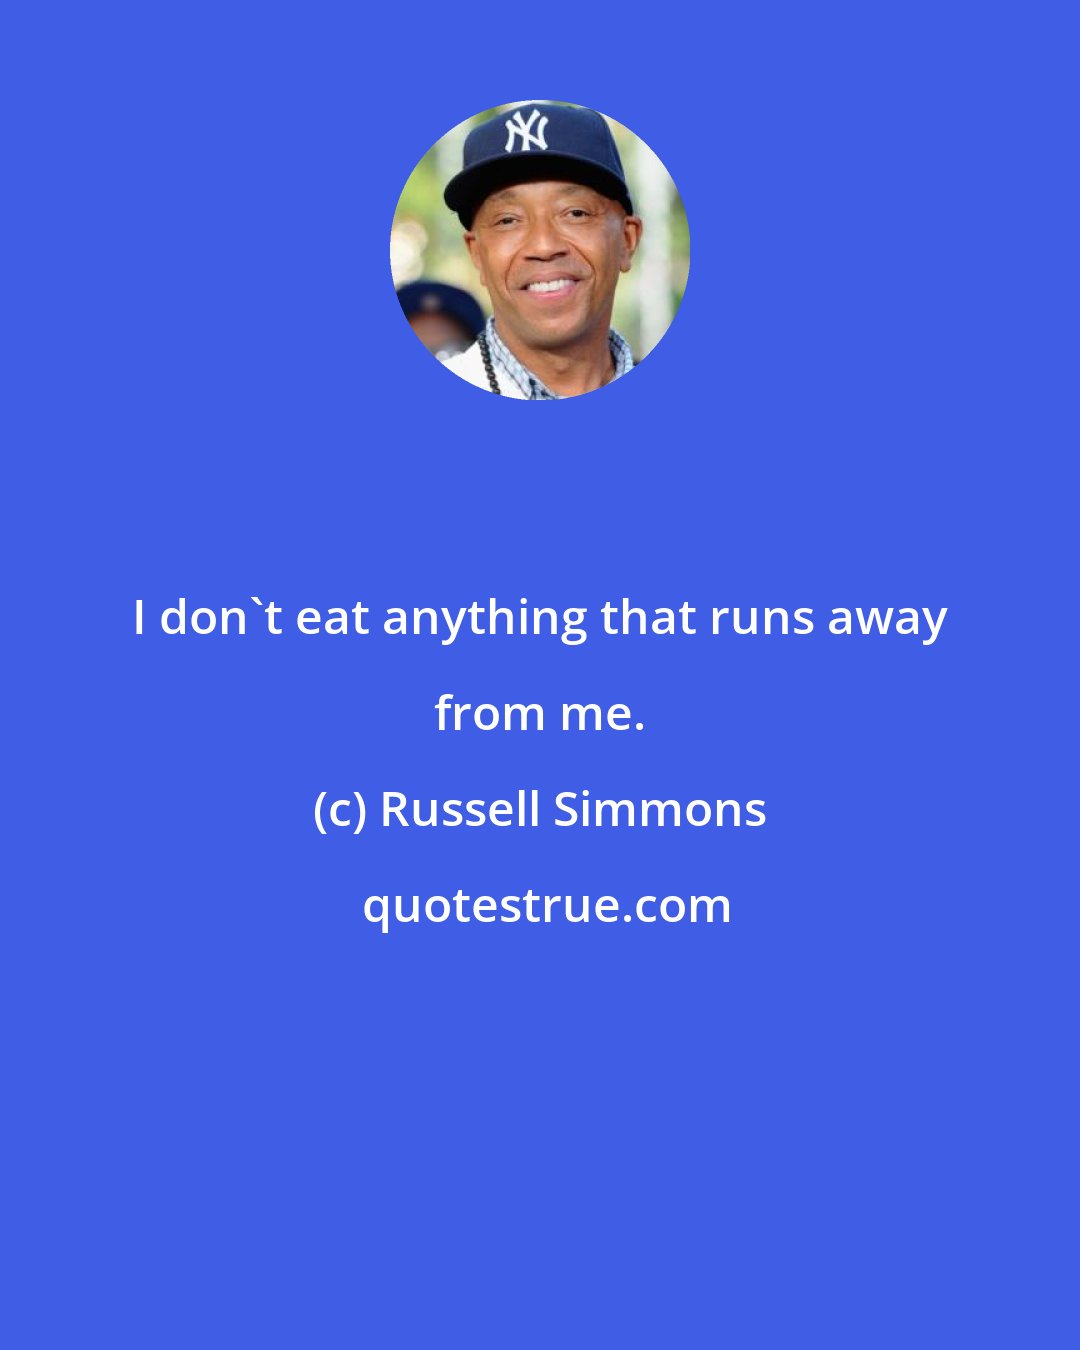 Russell Simmons: I don't eat anything that runs away from me.